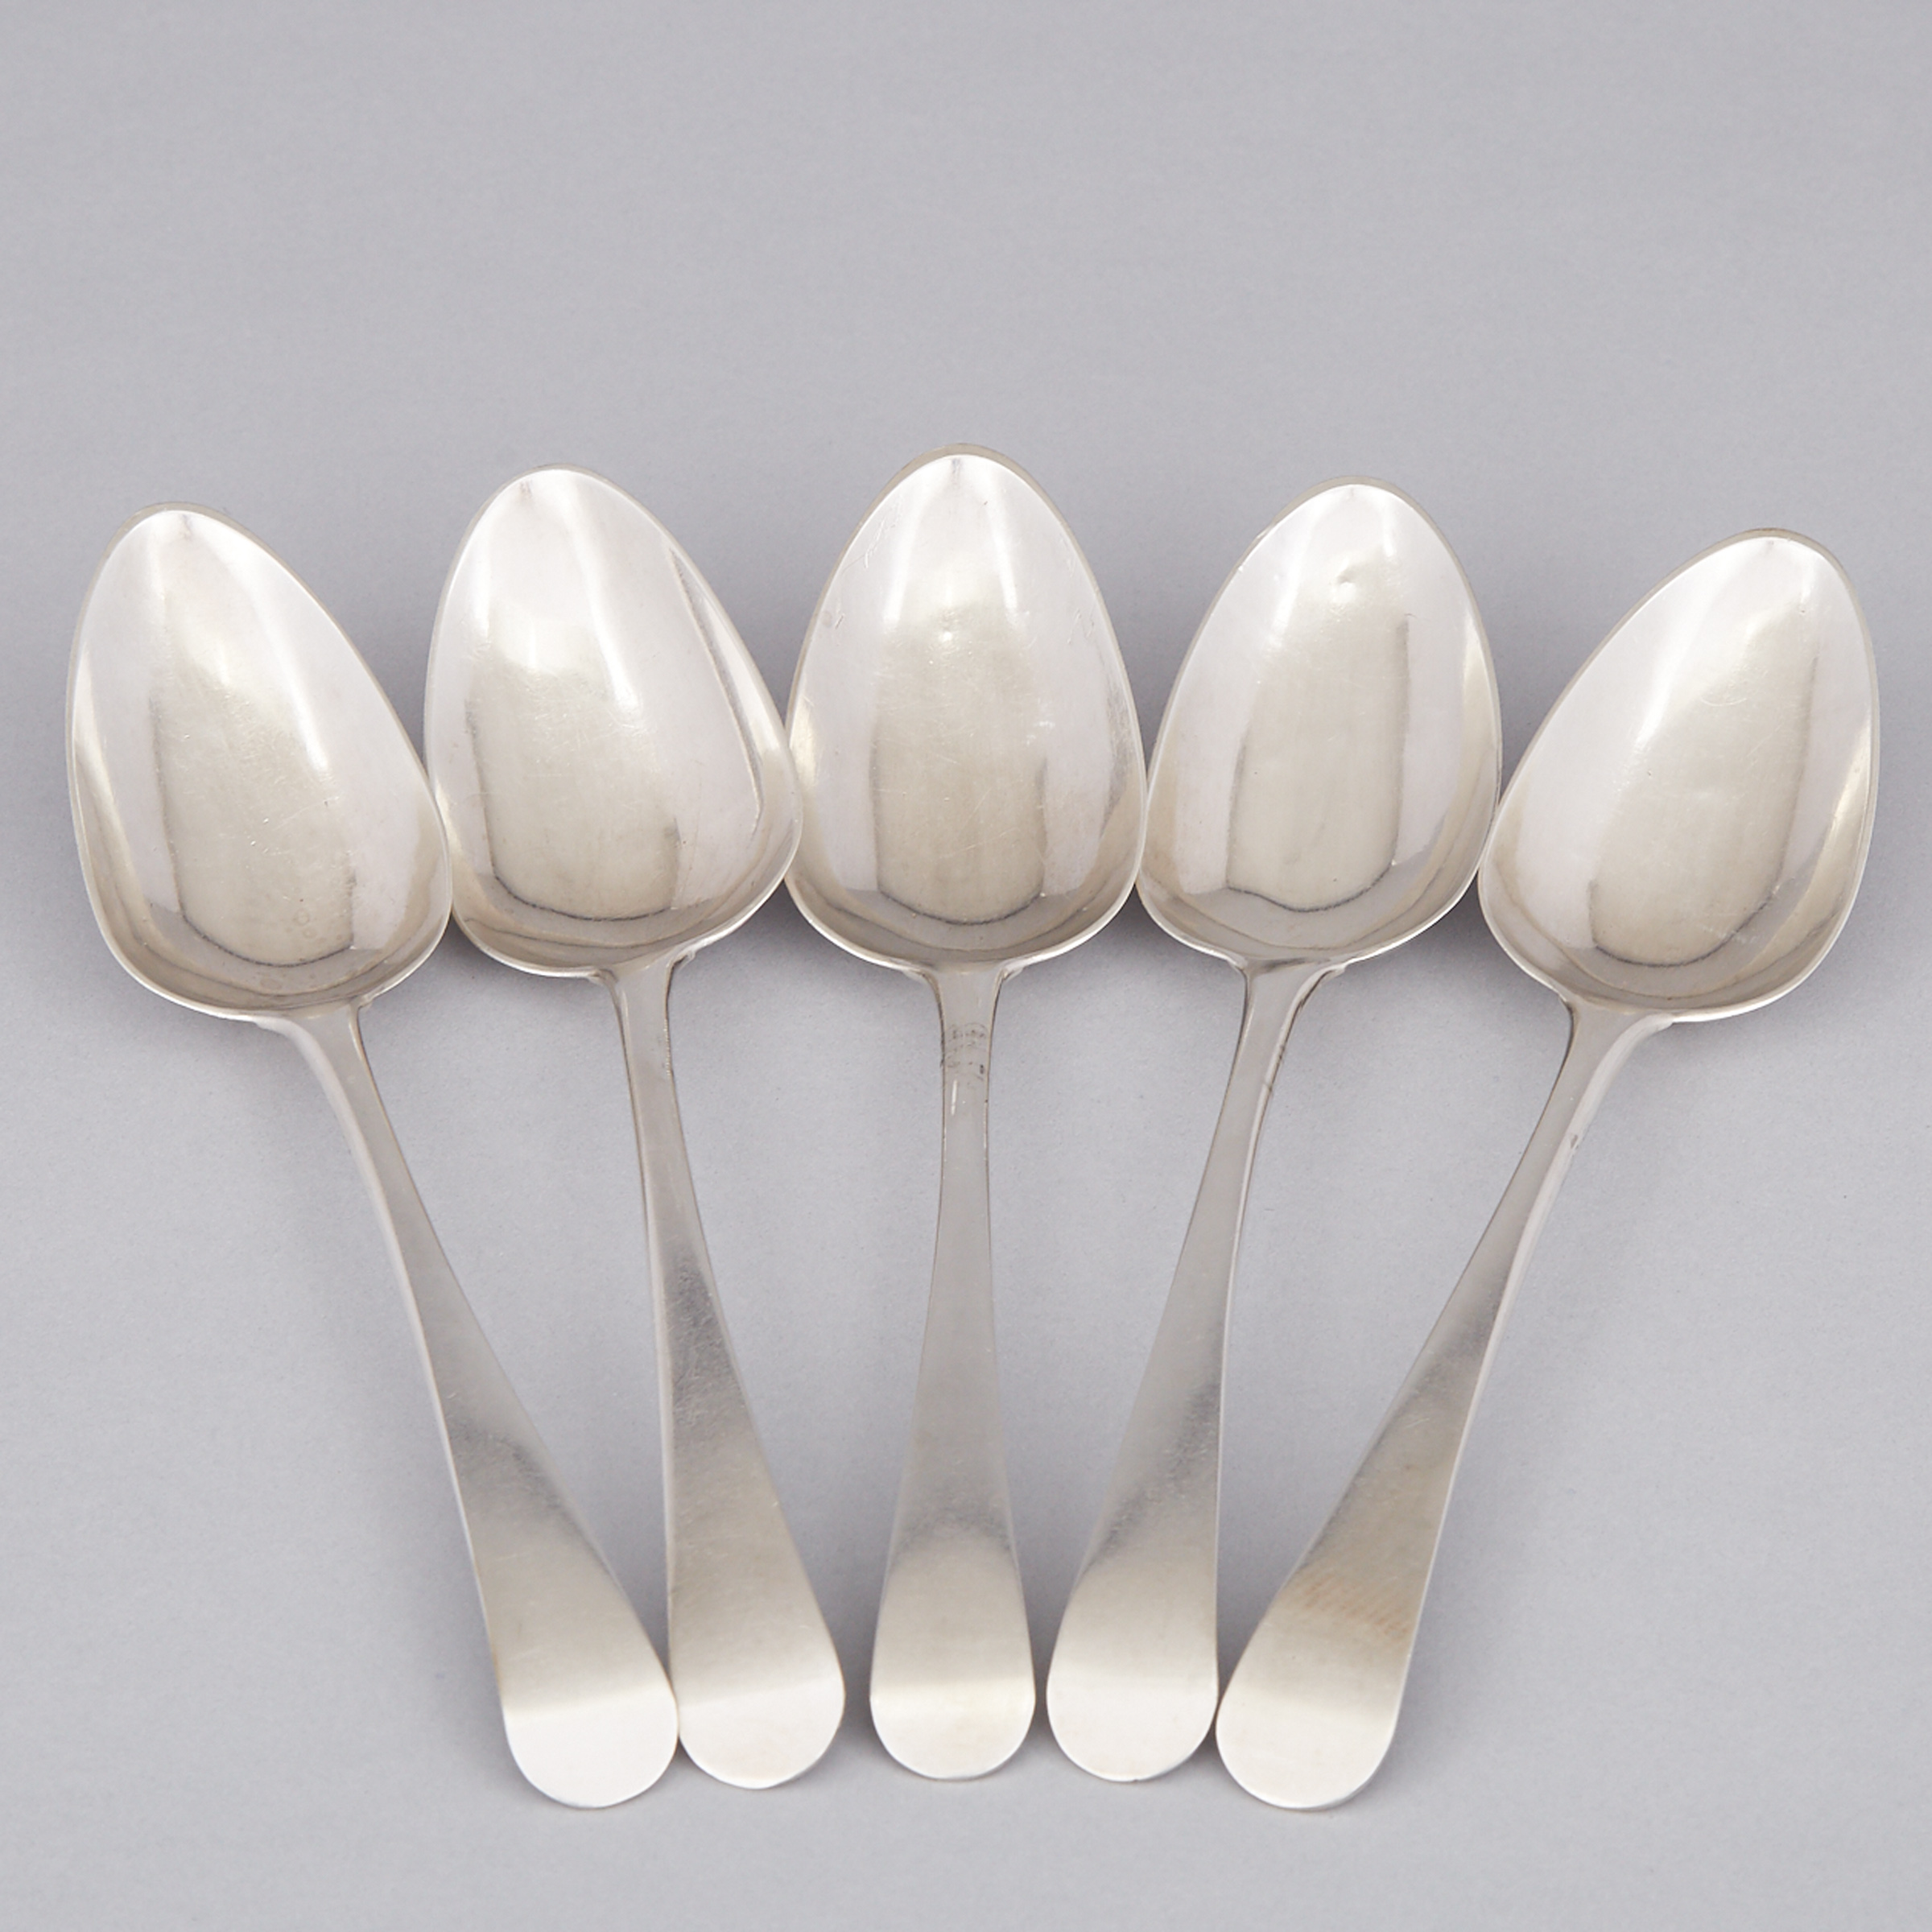 Five Canadian Silver Old English Pattern Table Spoons, Michel Fortin, Quebec, Que., c.1800